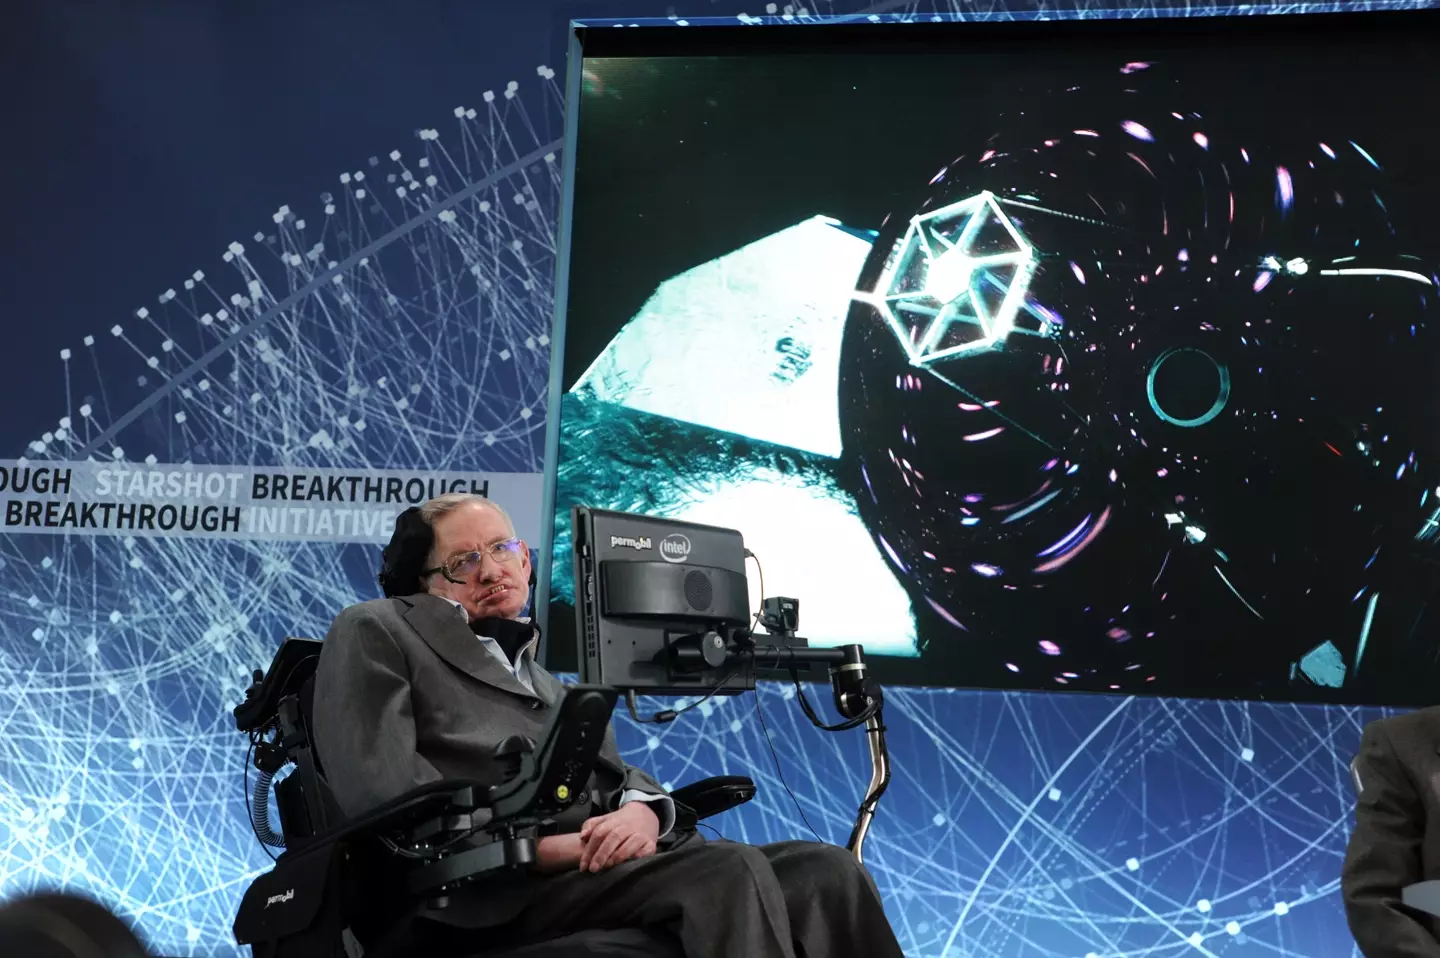 In 1976, Stephen Hawking suggested that black holes evaporate, thus destroying information about their origin.